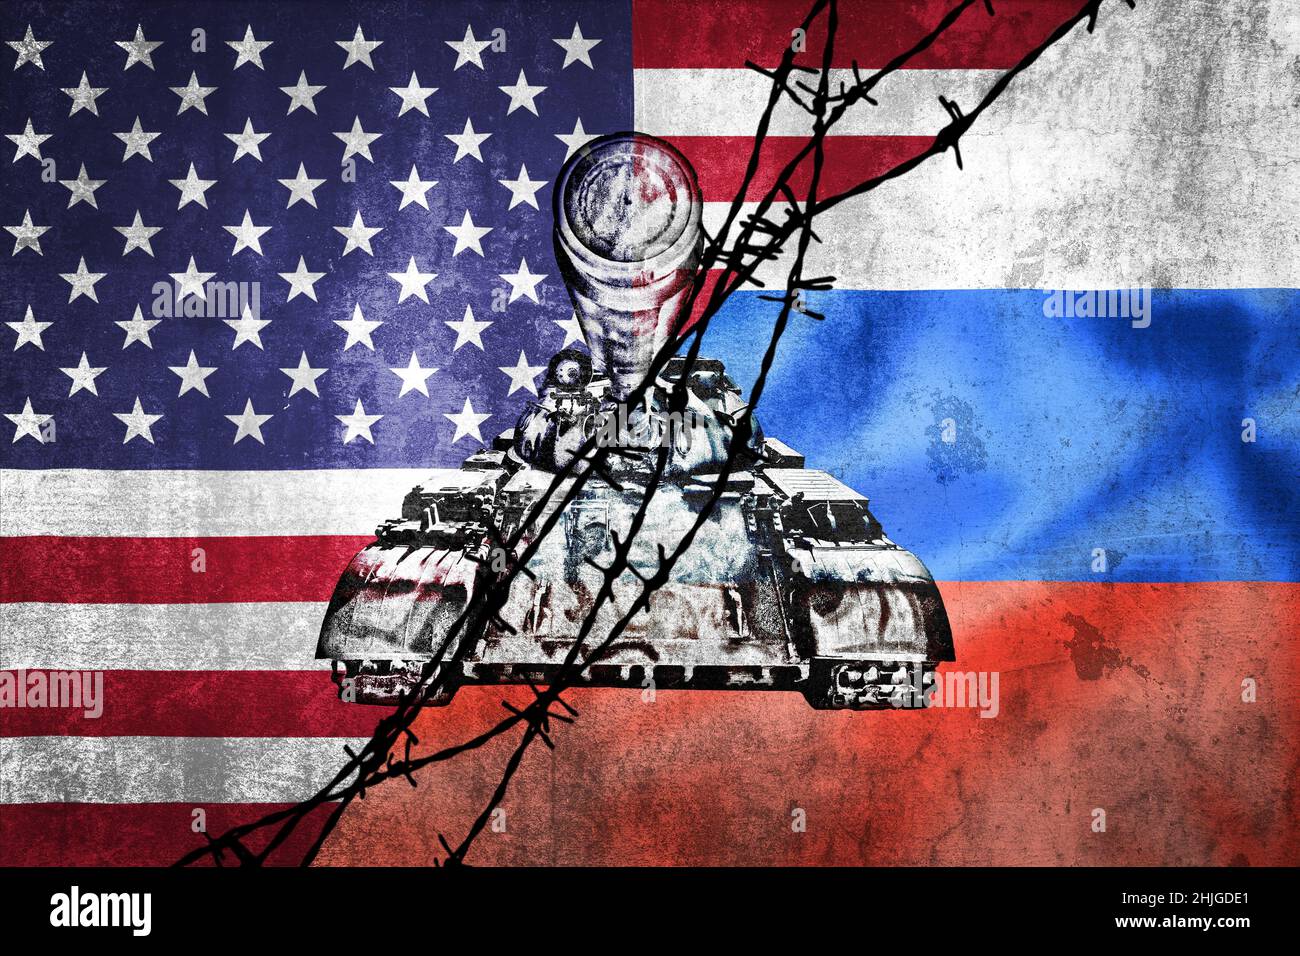 Grunge flags of Russian Federation and USA divided by barb wire and tank illustration, concept of tense relations between west and Russia Stock Photo